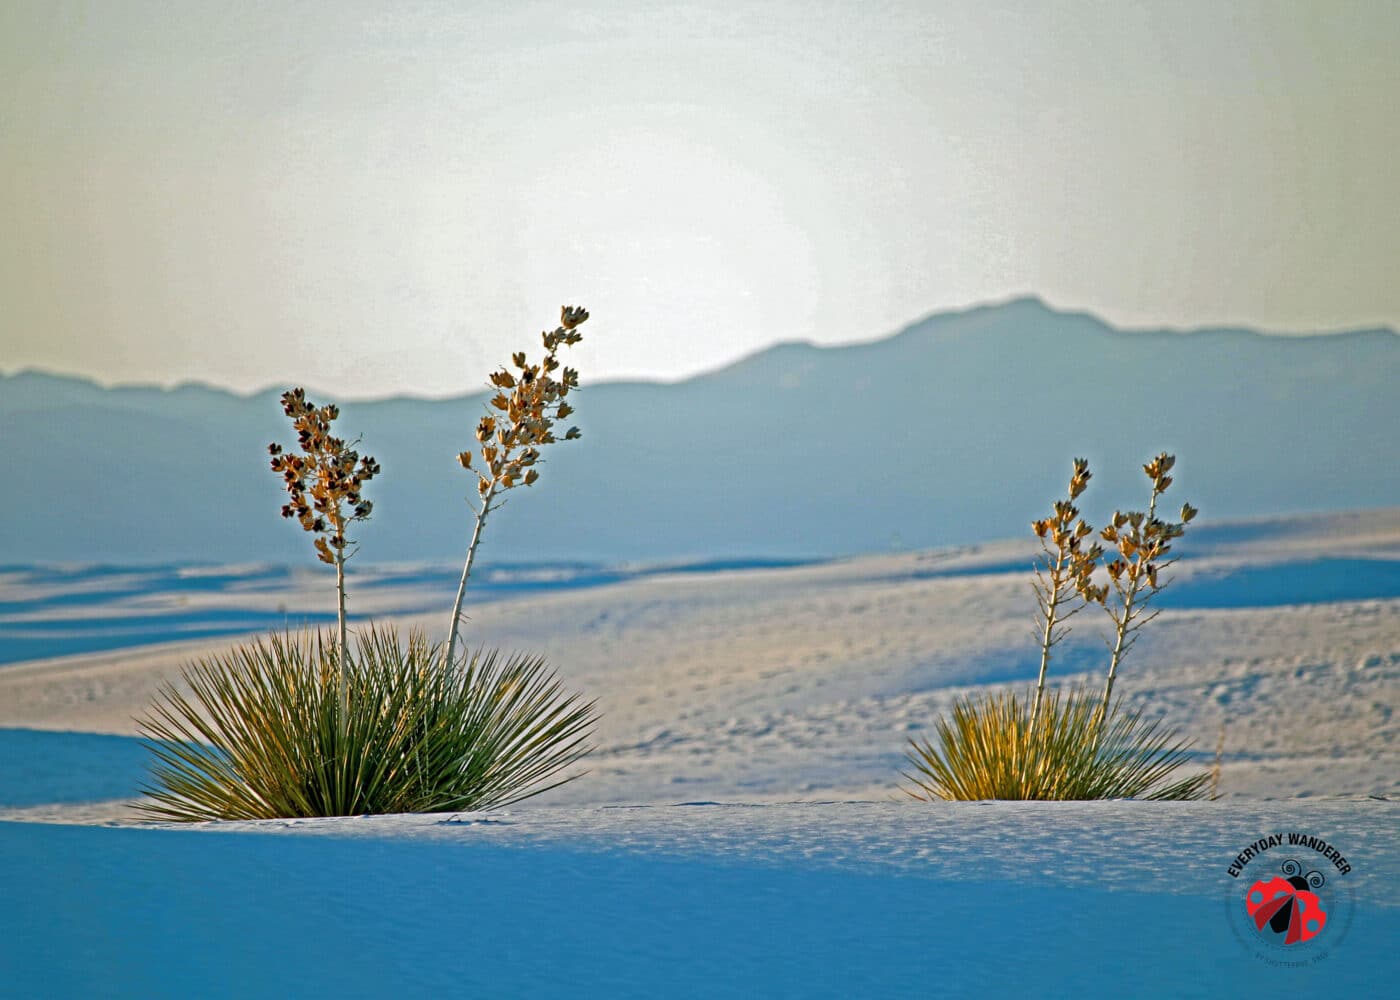 Looking to spend a day in White Sands National Monument? Check out our tips for making the most of your visit to the famed white sands. 